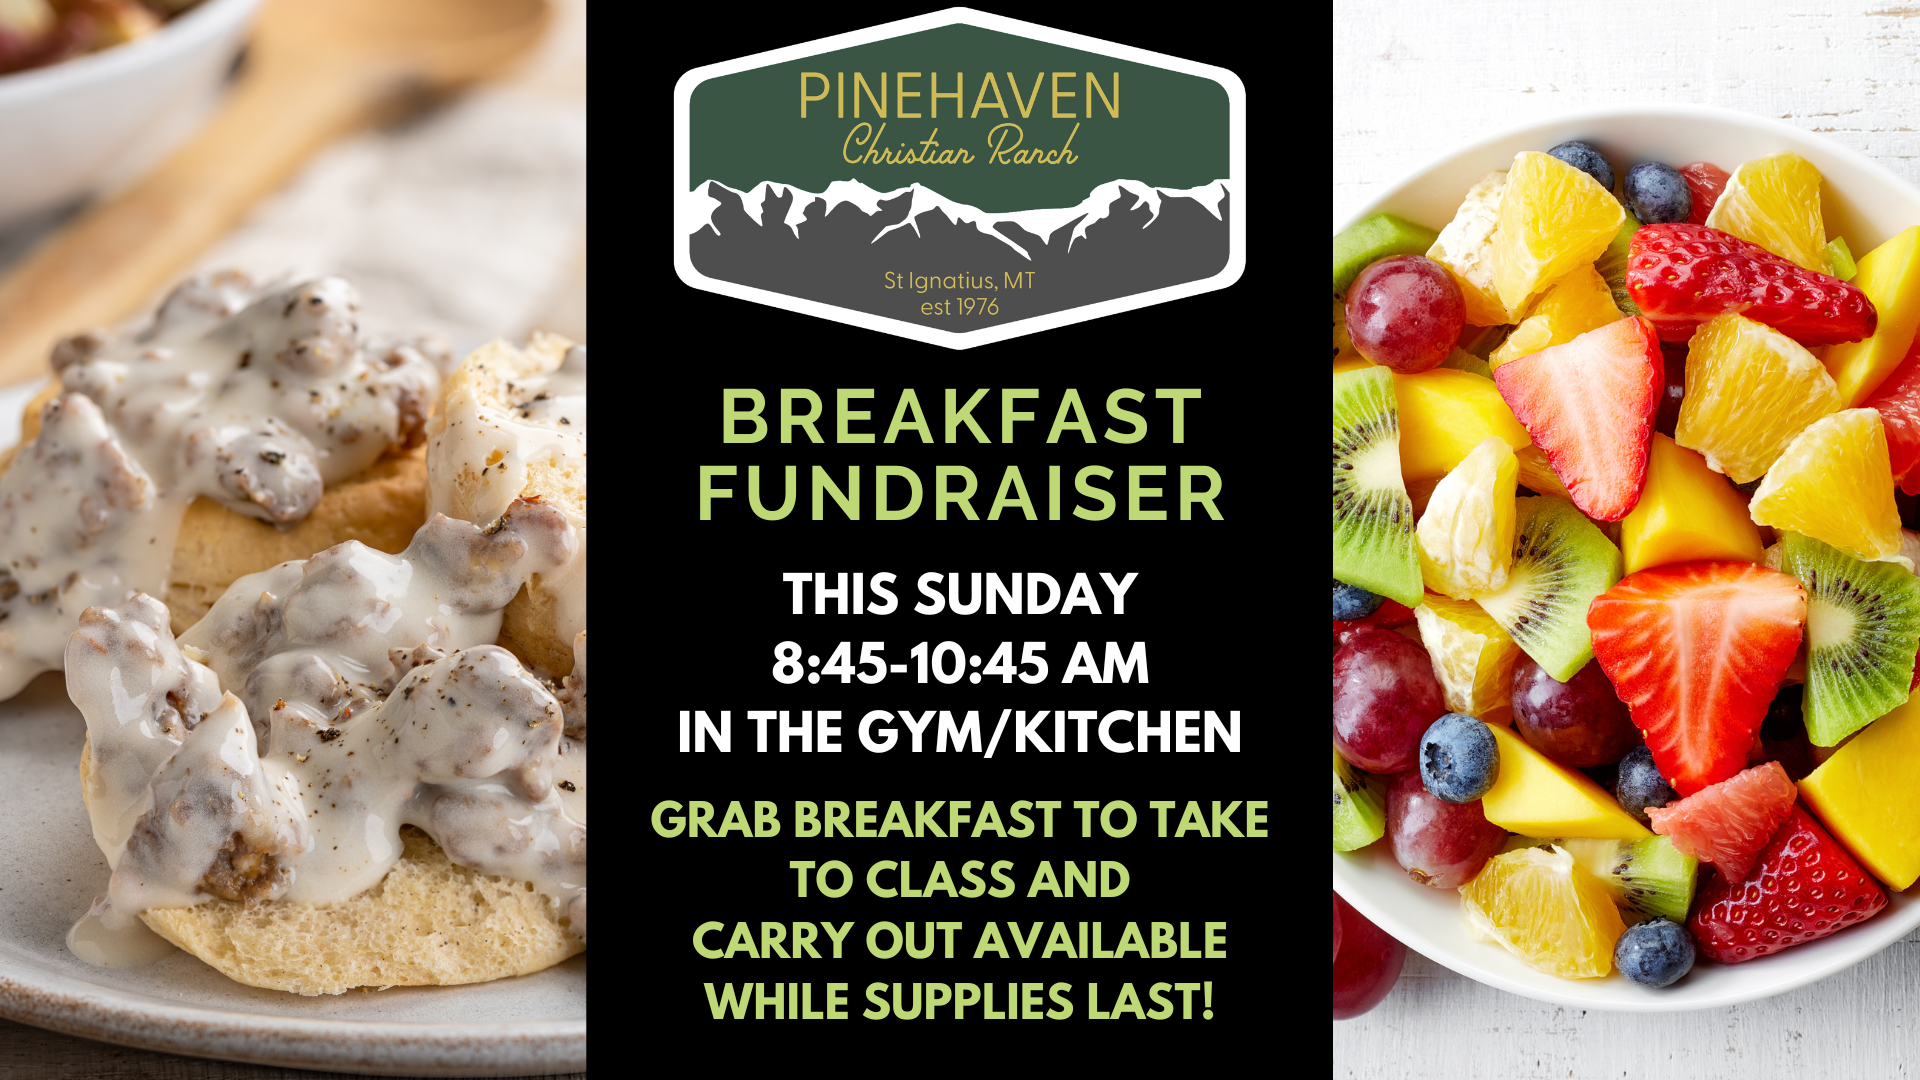 Pinehaven Biscuits and Gravy Fundraiser (Presentation) image